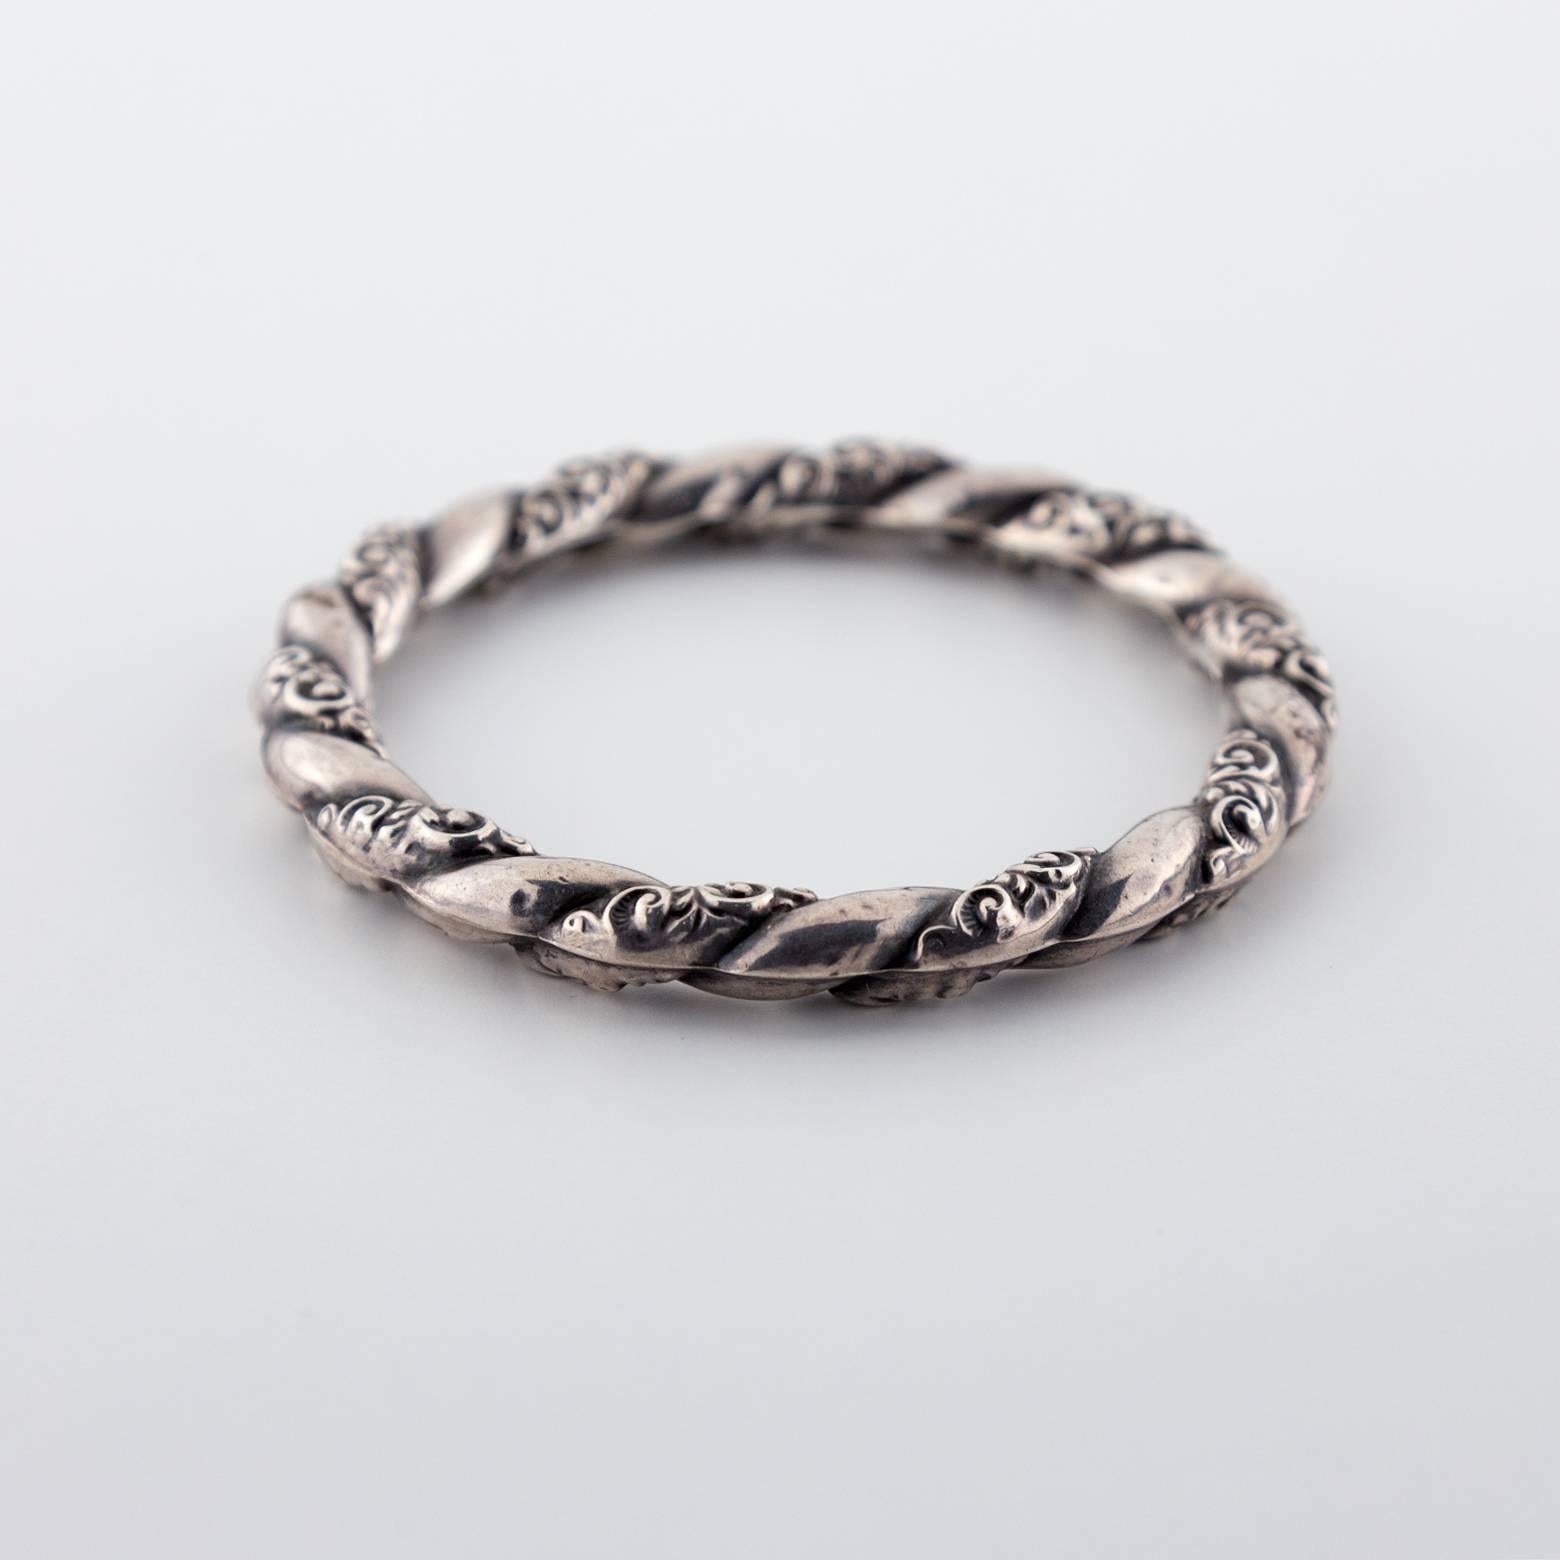 This lightweight sterling silver bangle is so delicate and elegant with such beautiful detail in the swirling patterns it's clearly Victorian. Easily stack-able or worn alone this piece is so very versatile! Stunning, unique, and intricate!